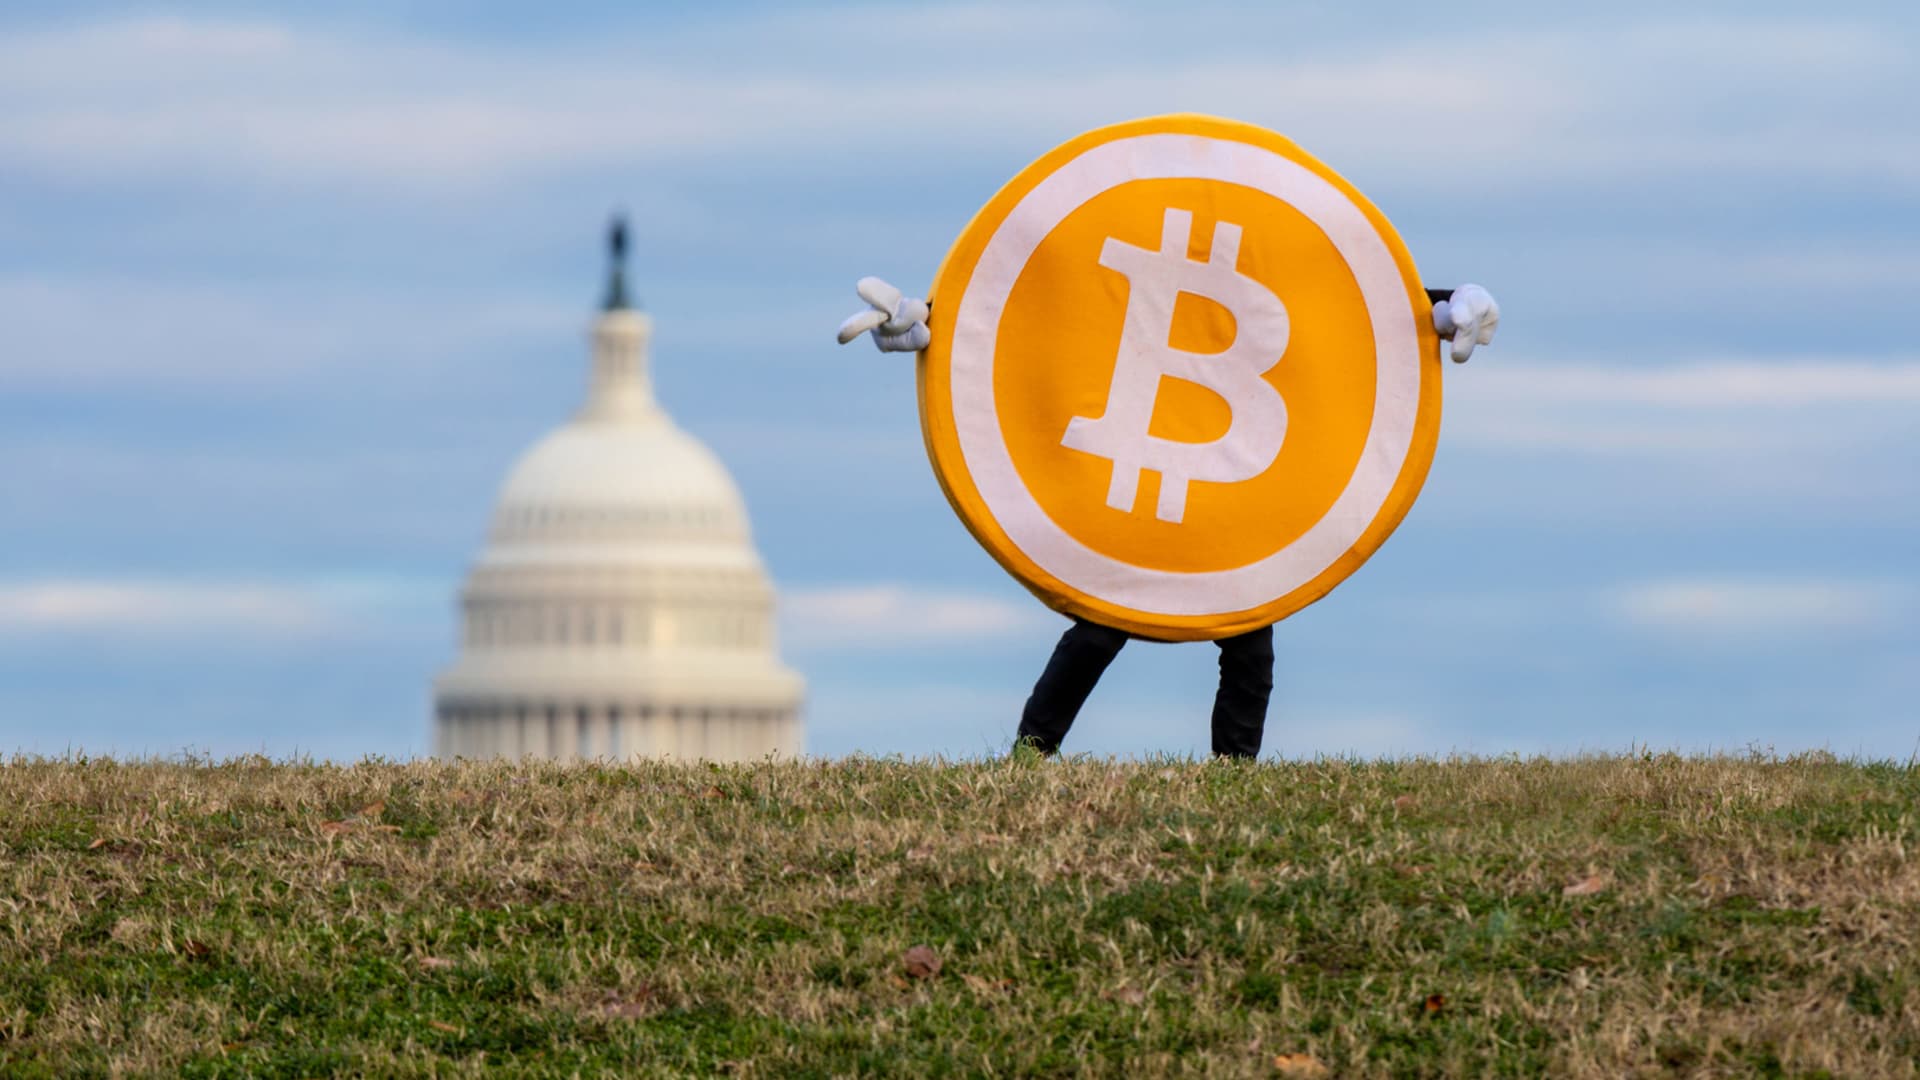 Crypto industry wields its influence in Washington after pouring over $30 million into campaigns - CNBC